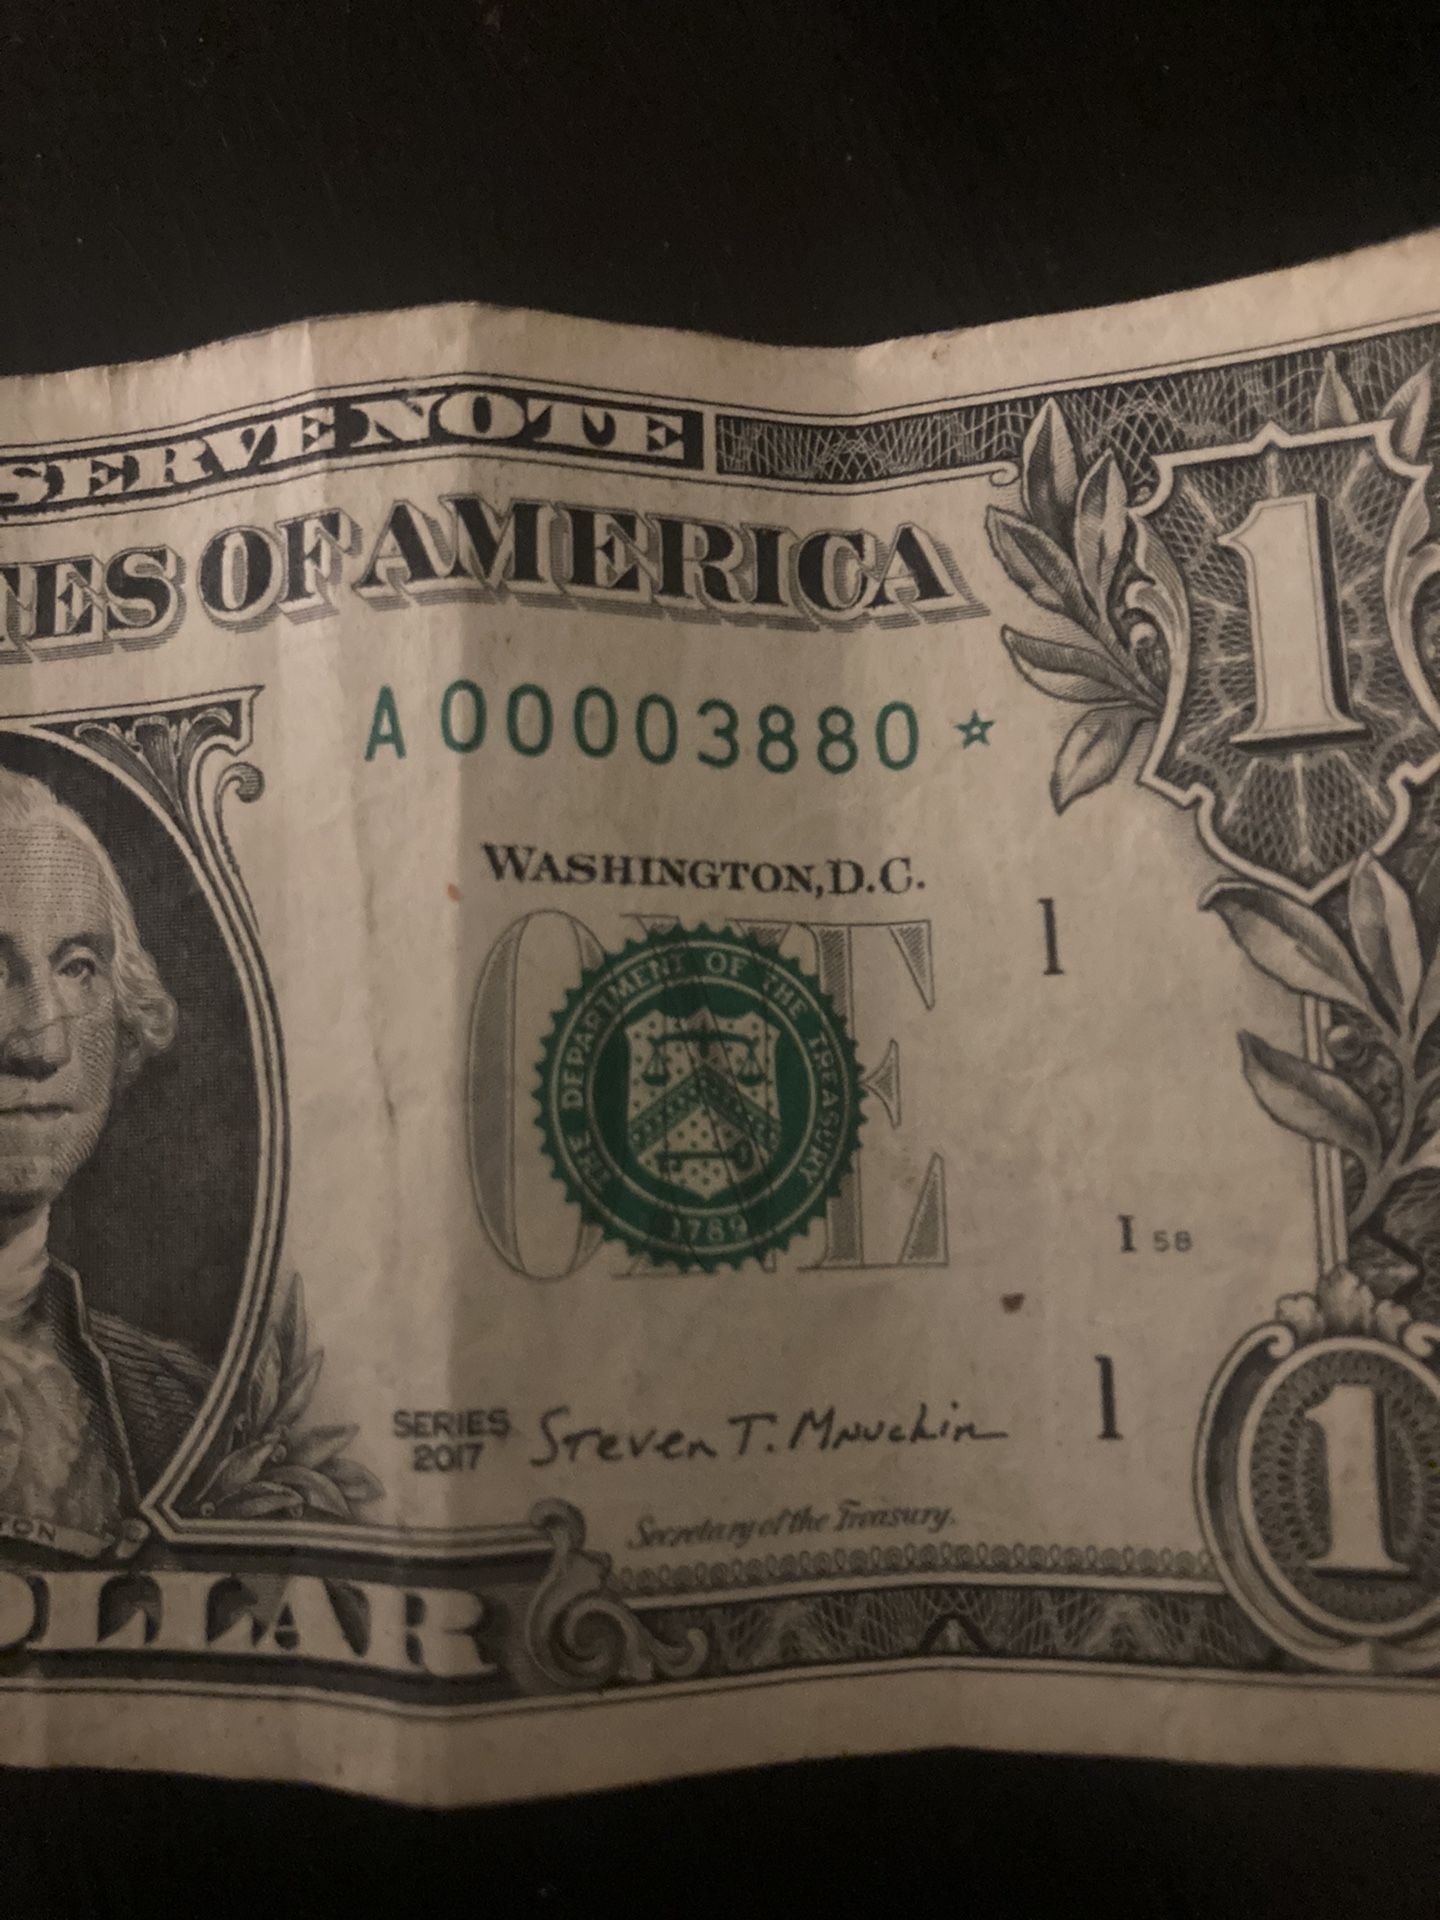 Rare Collectible One $ 1 Dollar Bill A00003880* low serial number + Star Note *